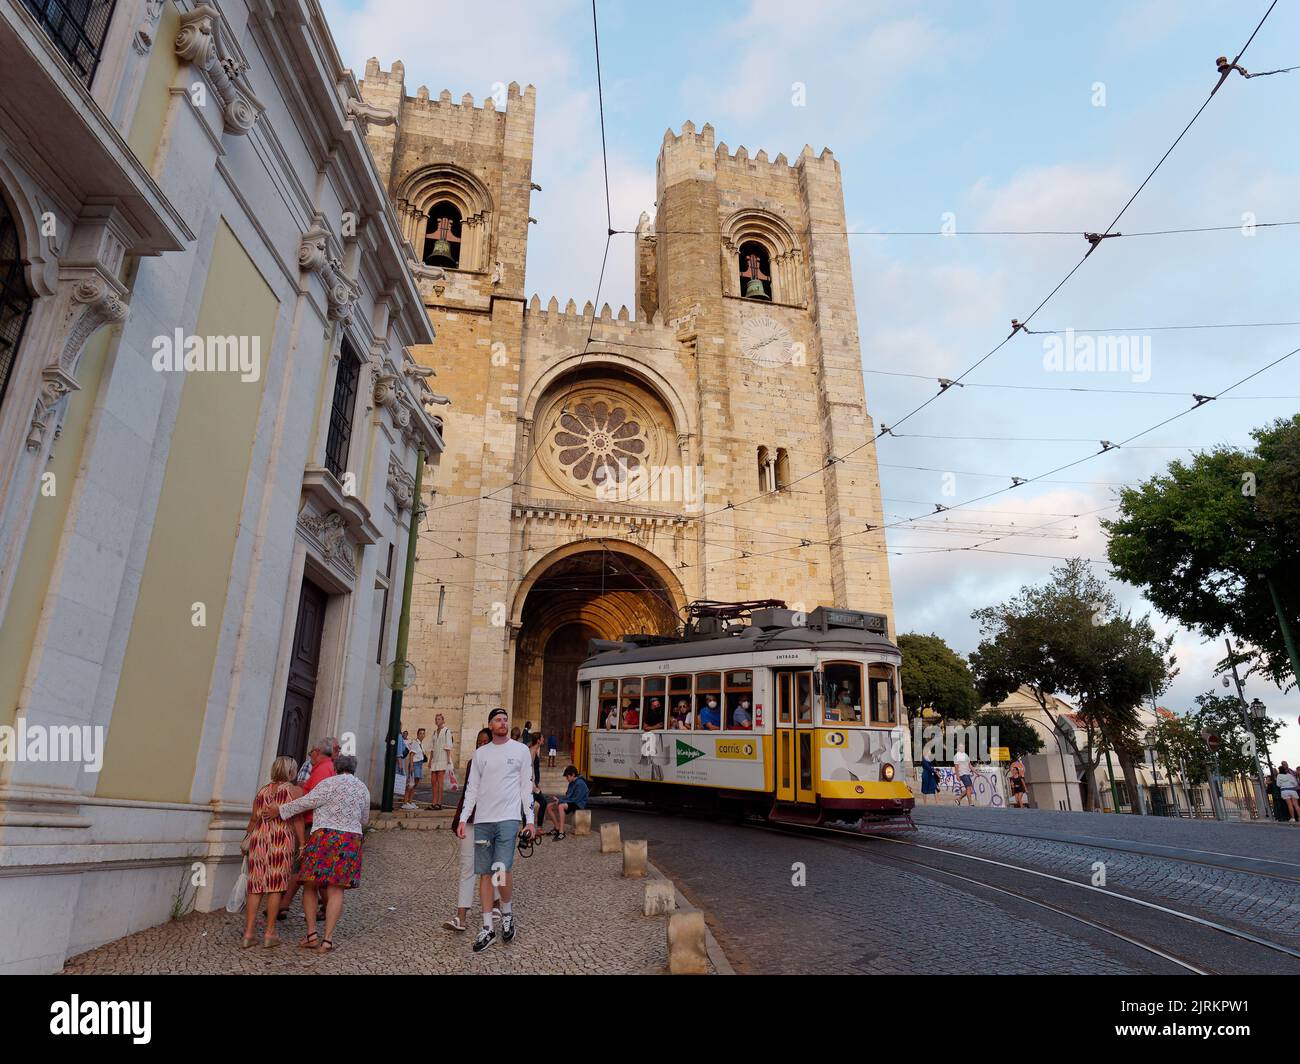 Cathedral of Saint Mary Major aka Lisbon Cathedral aka Sé de Lisboa. A tram passes by in front of the Cathedral as tourists walk in the street. Stock Photo